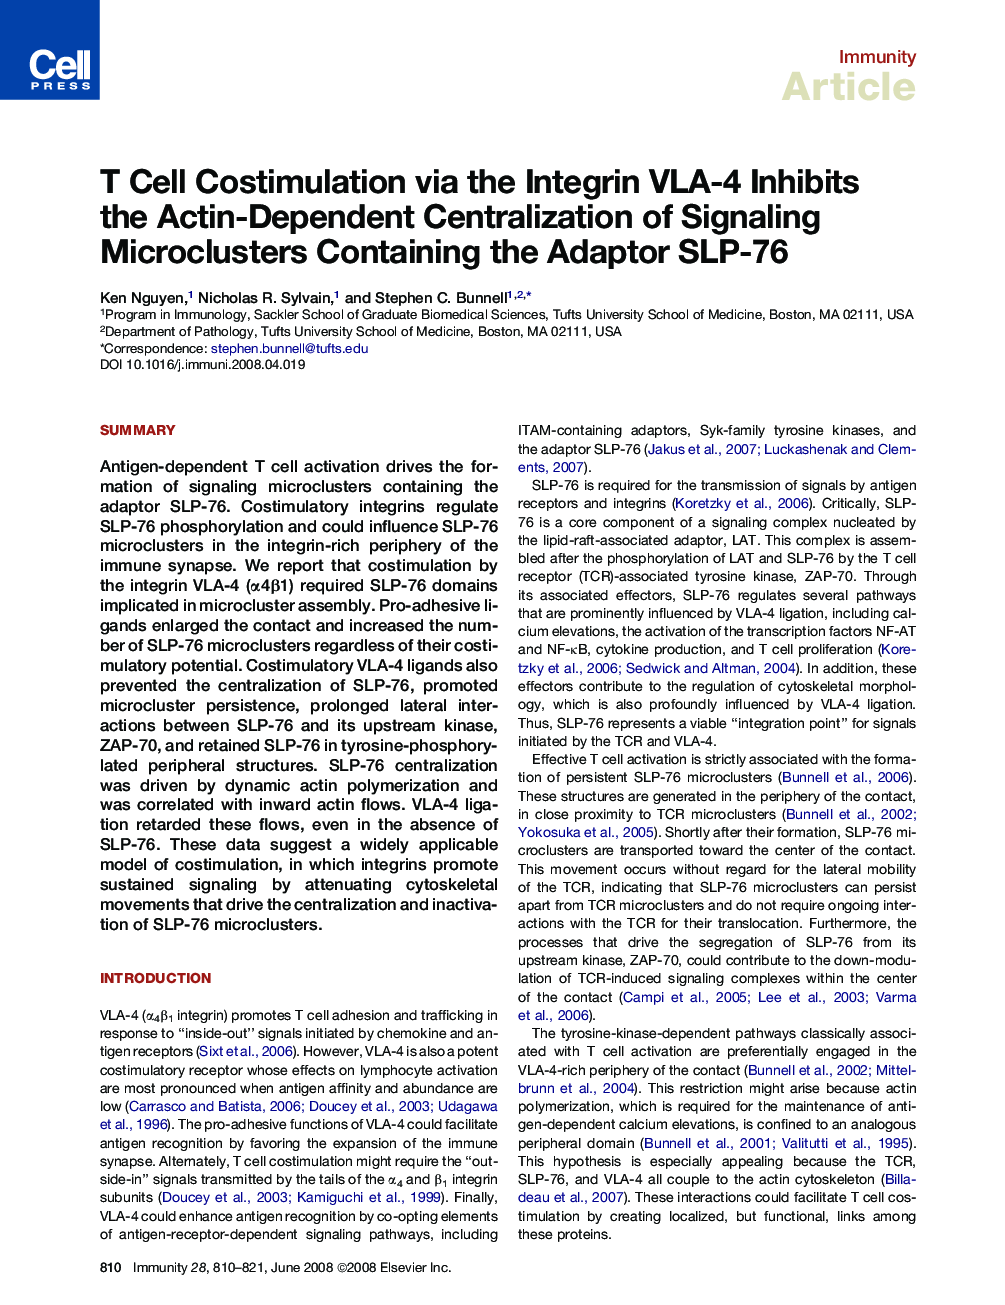 T Cell Costimulation via the Integrin VLA-4 Inhibits the Actin-Dependent Centralization of Signaling Microclusters Containing the Adaptor SLP-76